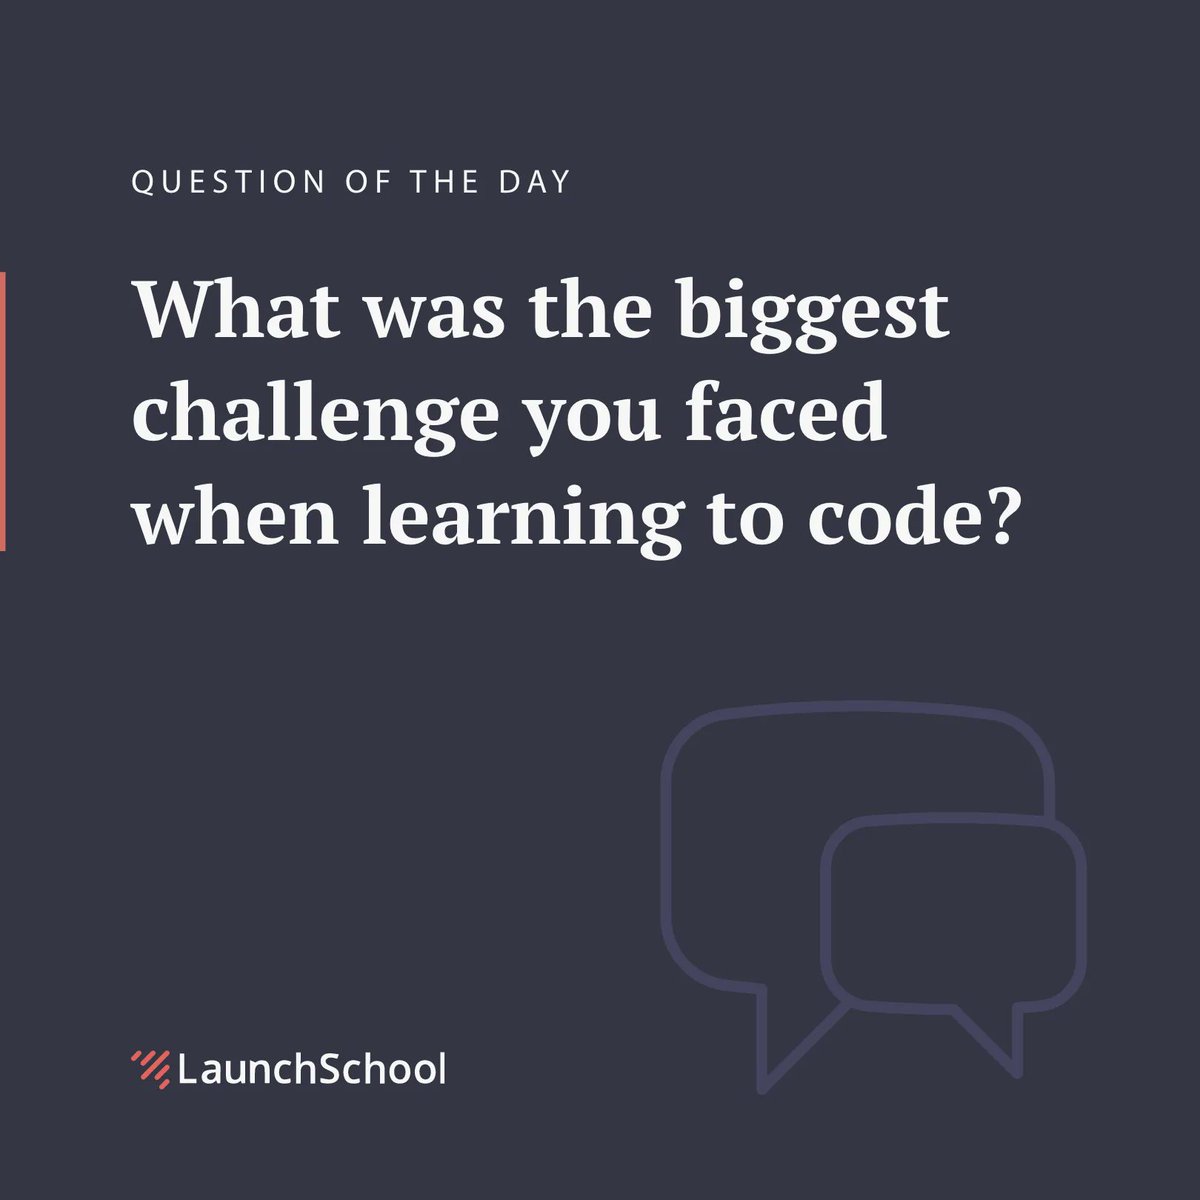 Let's share our experiences and help current #launchschool students out. What was the biggest challenge you faced when learning to code? Comment below👇

#CodingStruggles #LearningToCode #ProgrammingProblems #softwareengineering